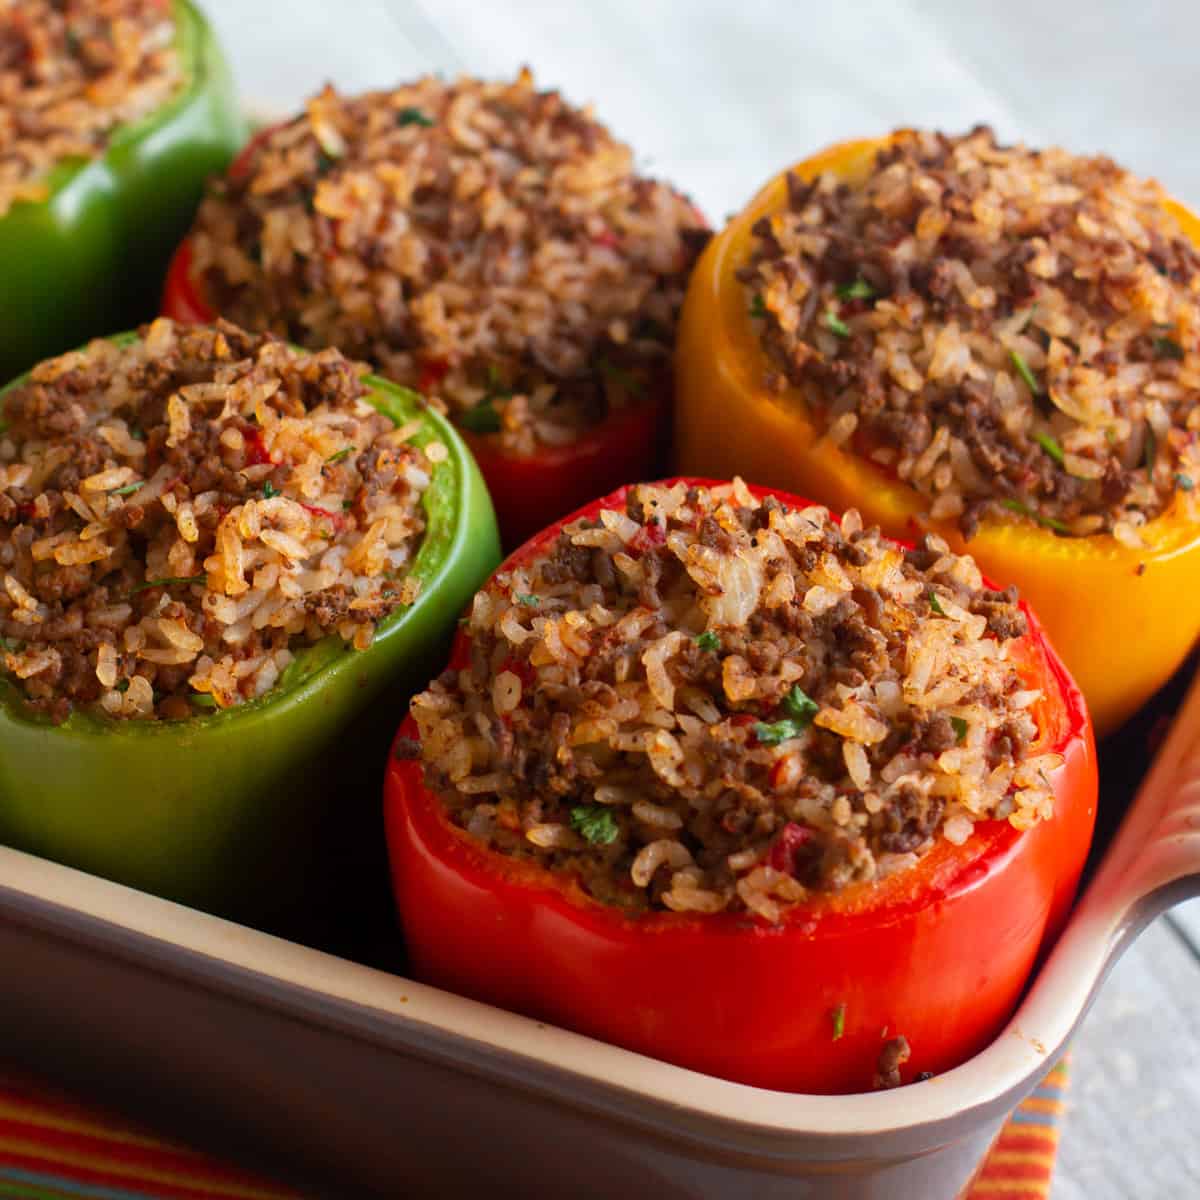 Baked stuffed peppers in a baking dish.